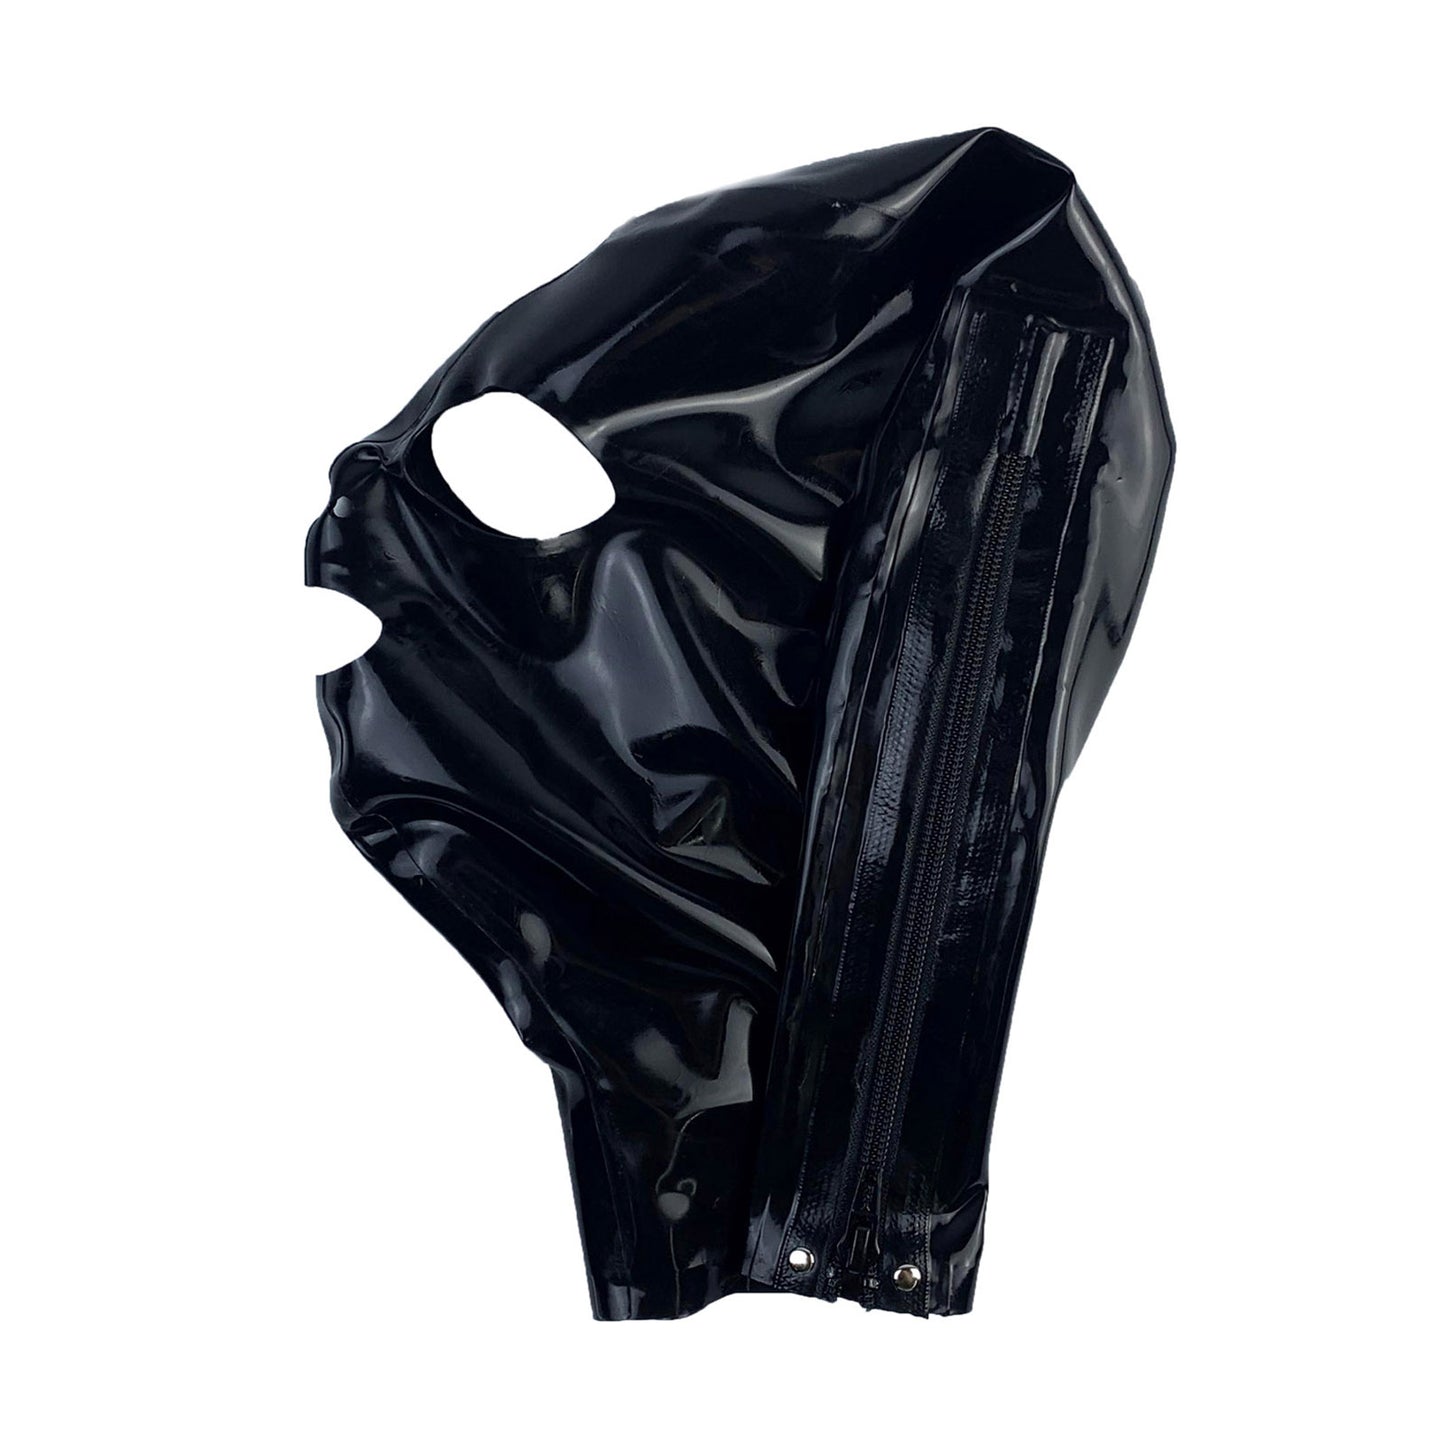 MONNIK Realistic Black Latex Mask Rubber Unisex Hood Open Eyes&Mouth Unique Sexy Wear for Party Catsuit Party